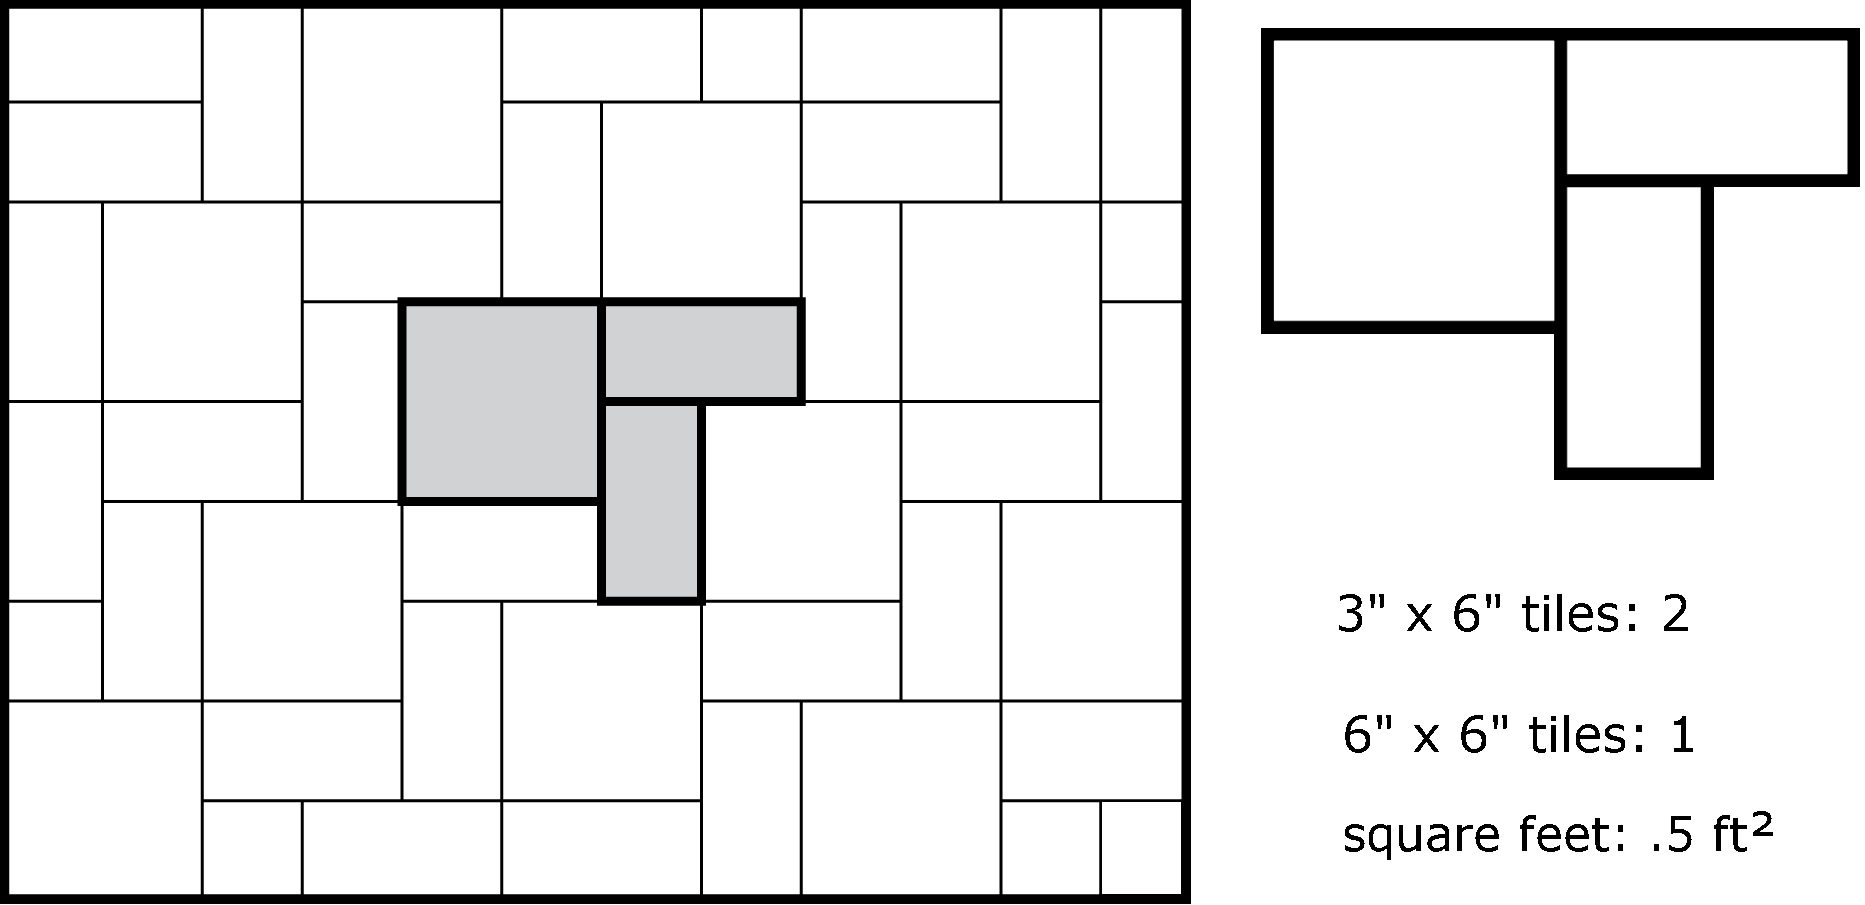 Illustration showing a pattern made up with two 3-inch by 6-inch tiles and one 6-inch by 6-inch tile